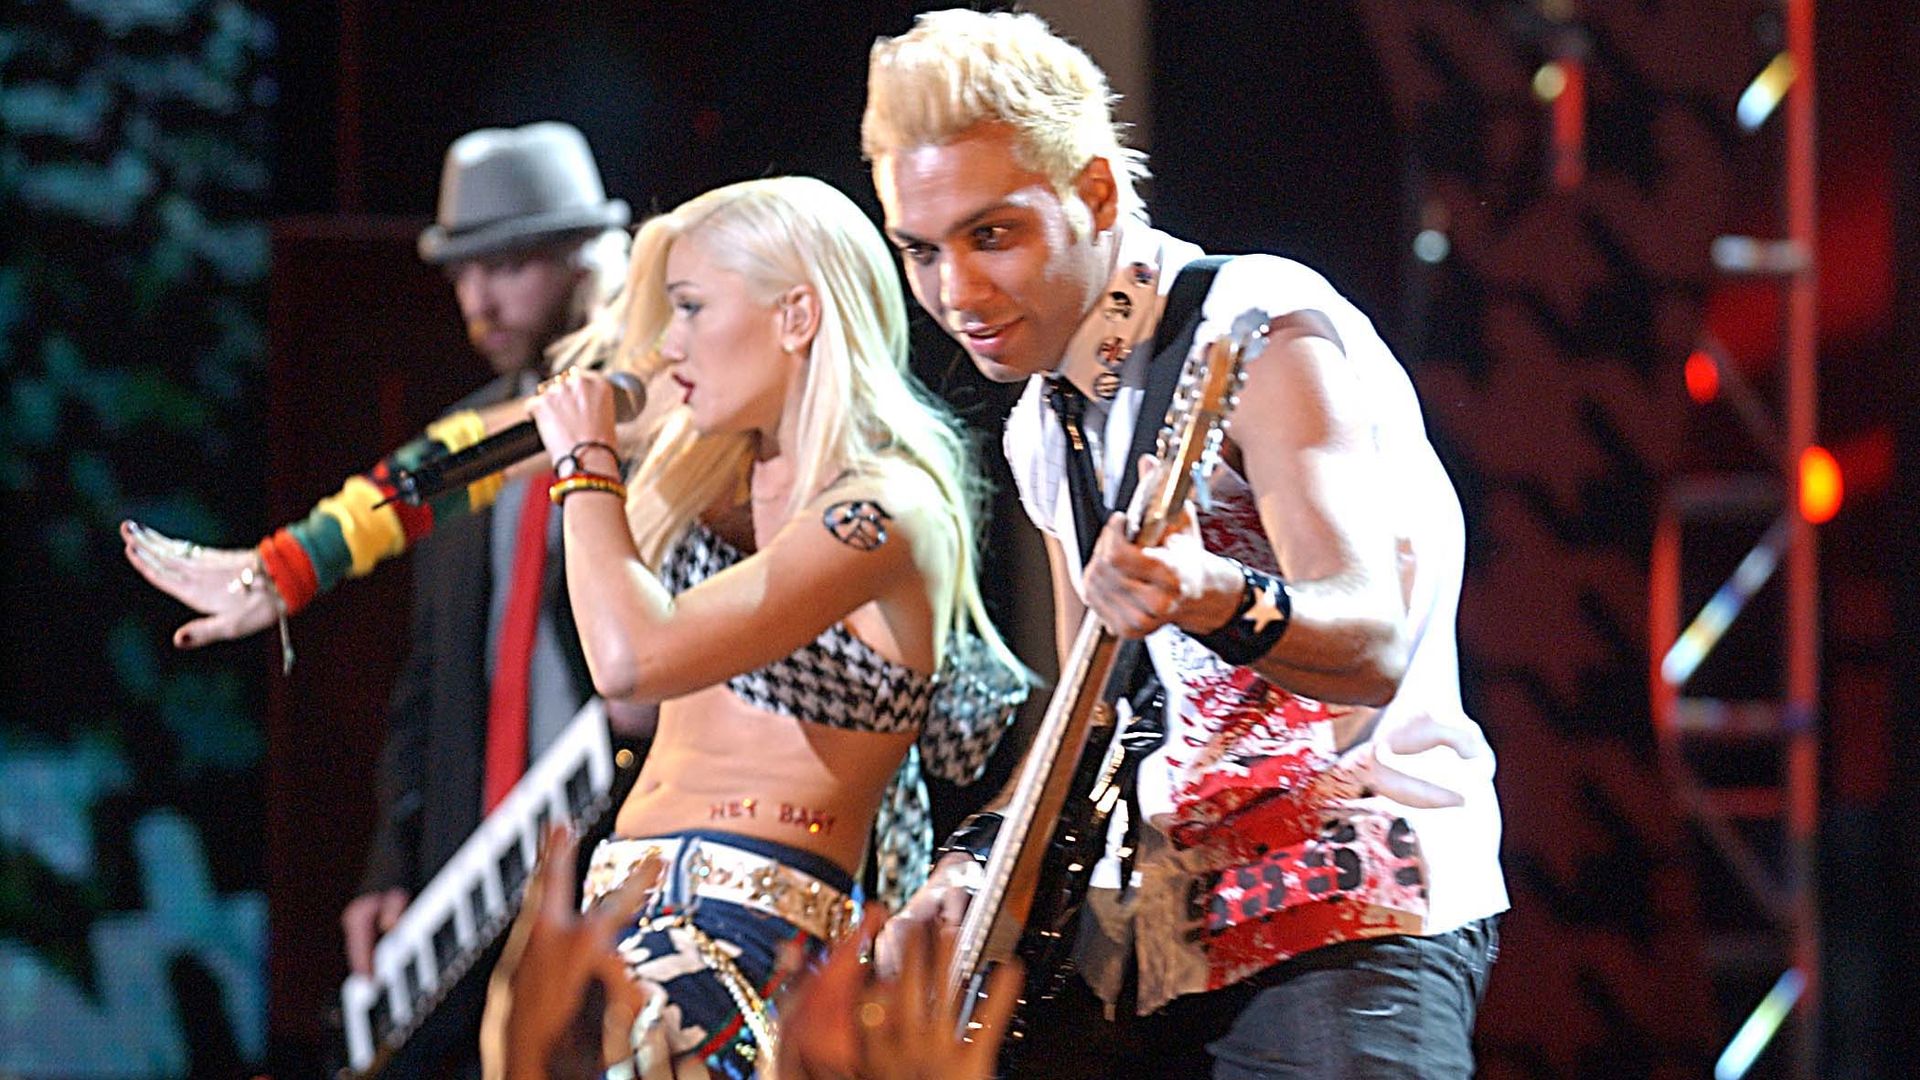 A look back at Gwen Stefani's bittersweet romance with No Doubt bandmate Tony Kanal